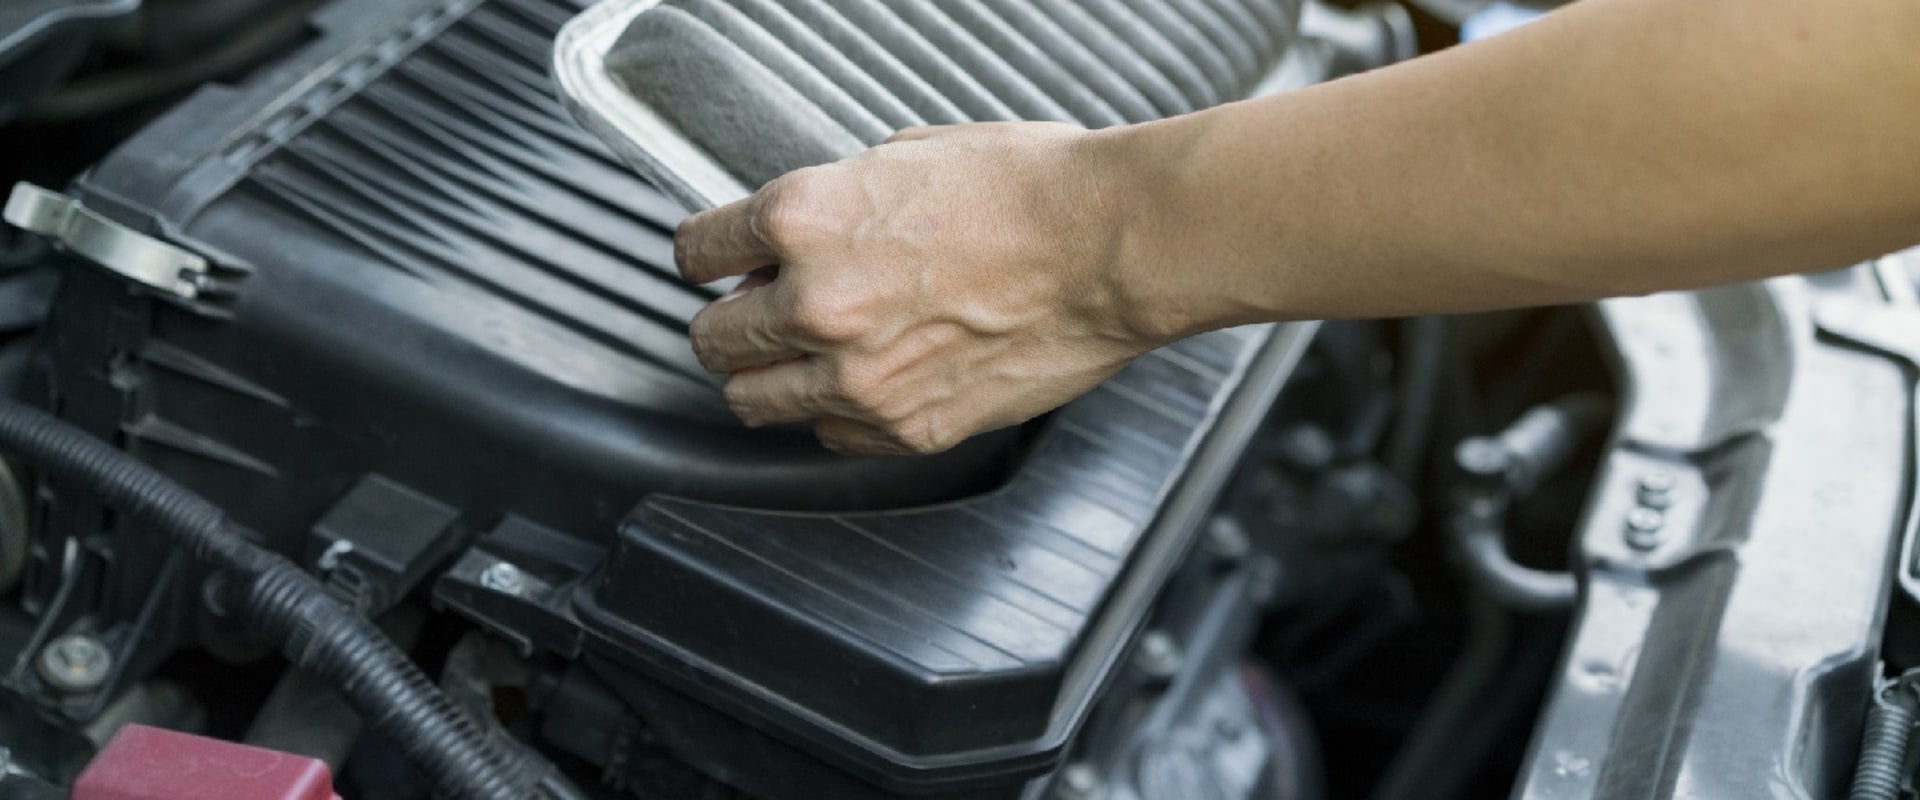 How Many Times Can You Clean an Air Filter?